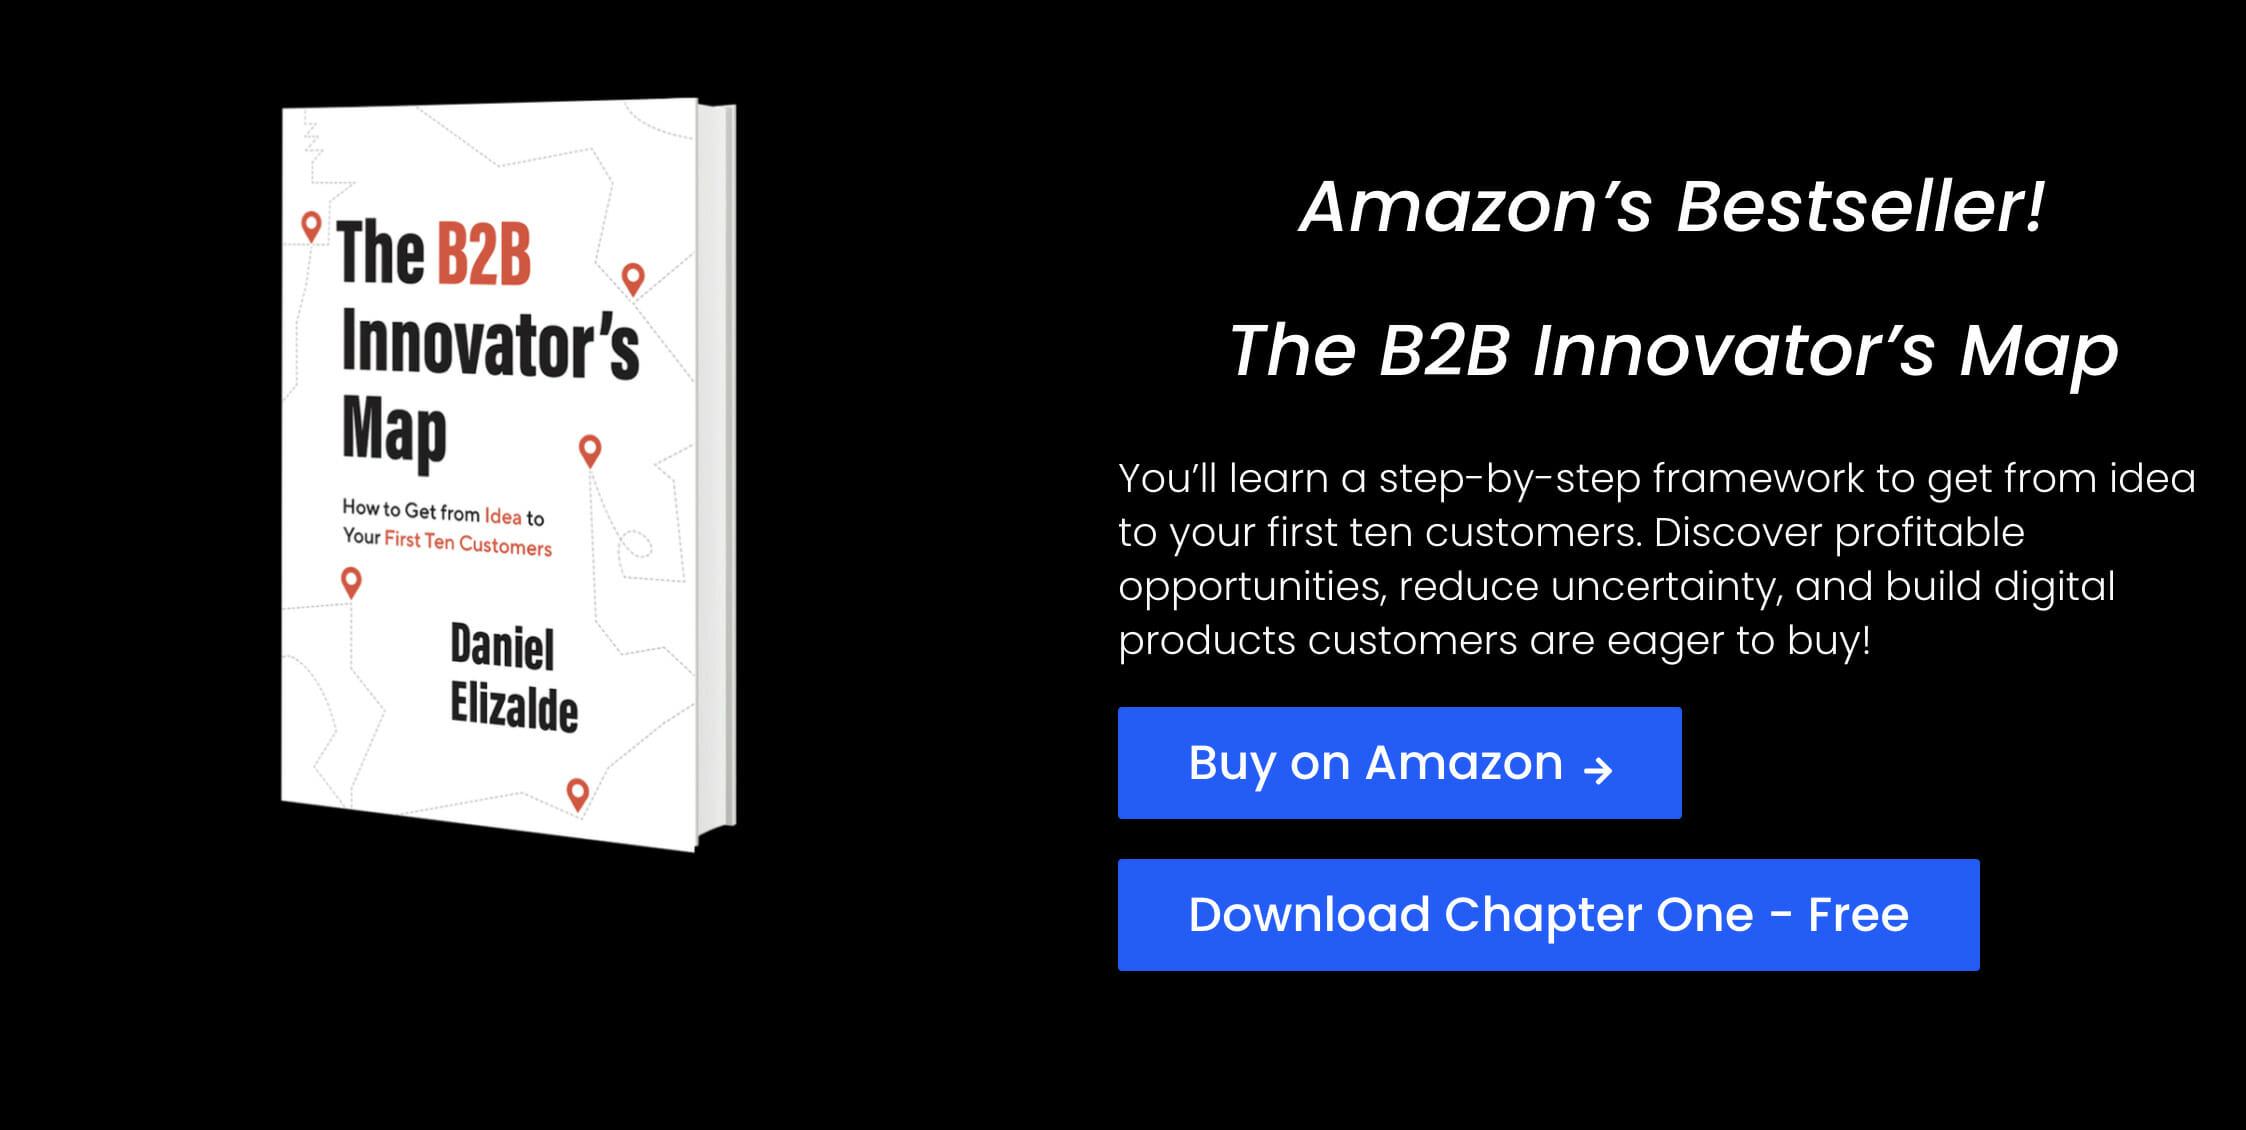 The B2B Innovator’s Map – How to get ideas from your first ten customers’ – free chapter!